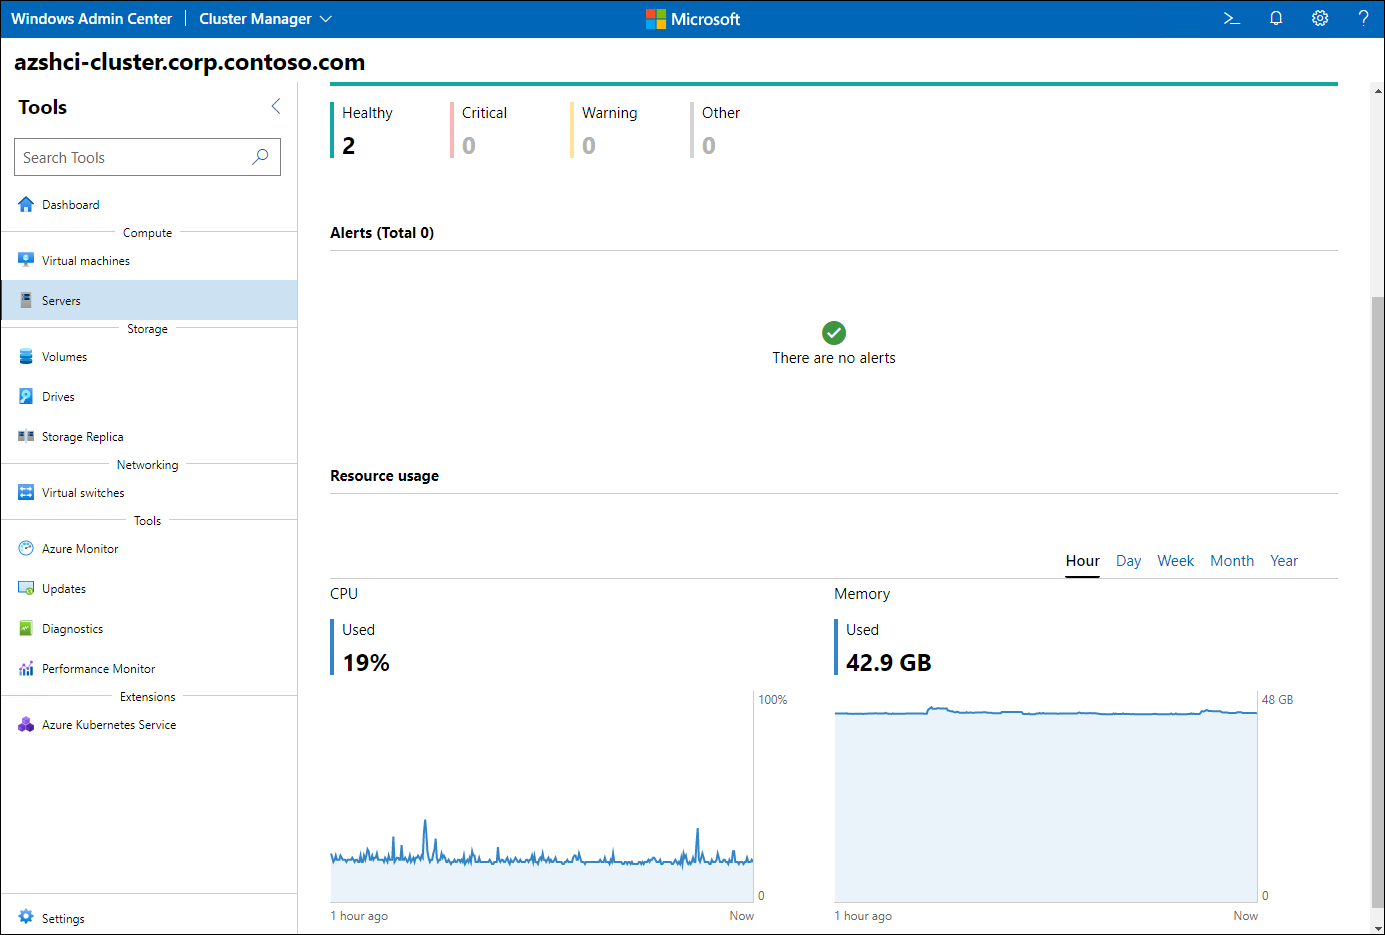 The screenshot depicts the Windows Admin Center dashboard displaying information about the status and performance of cluster nodes.